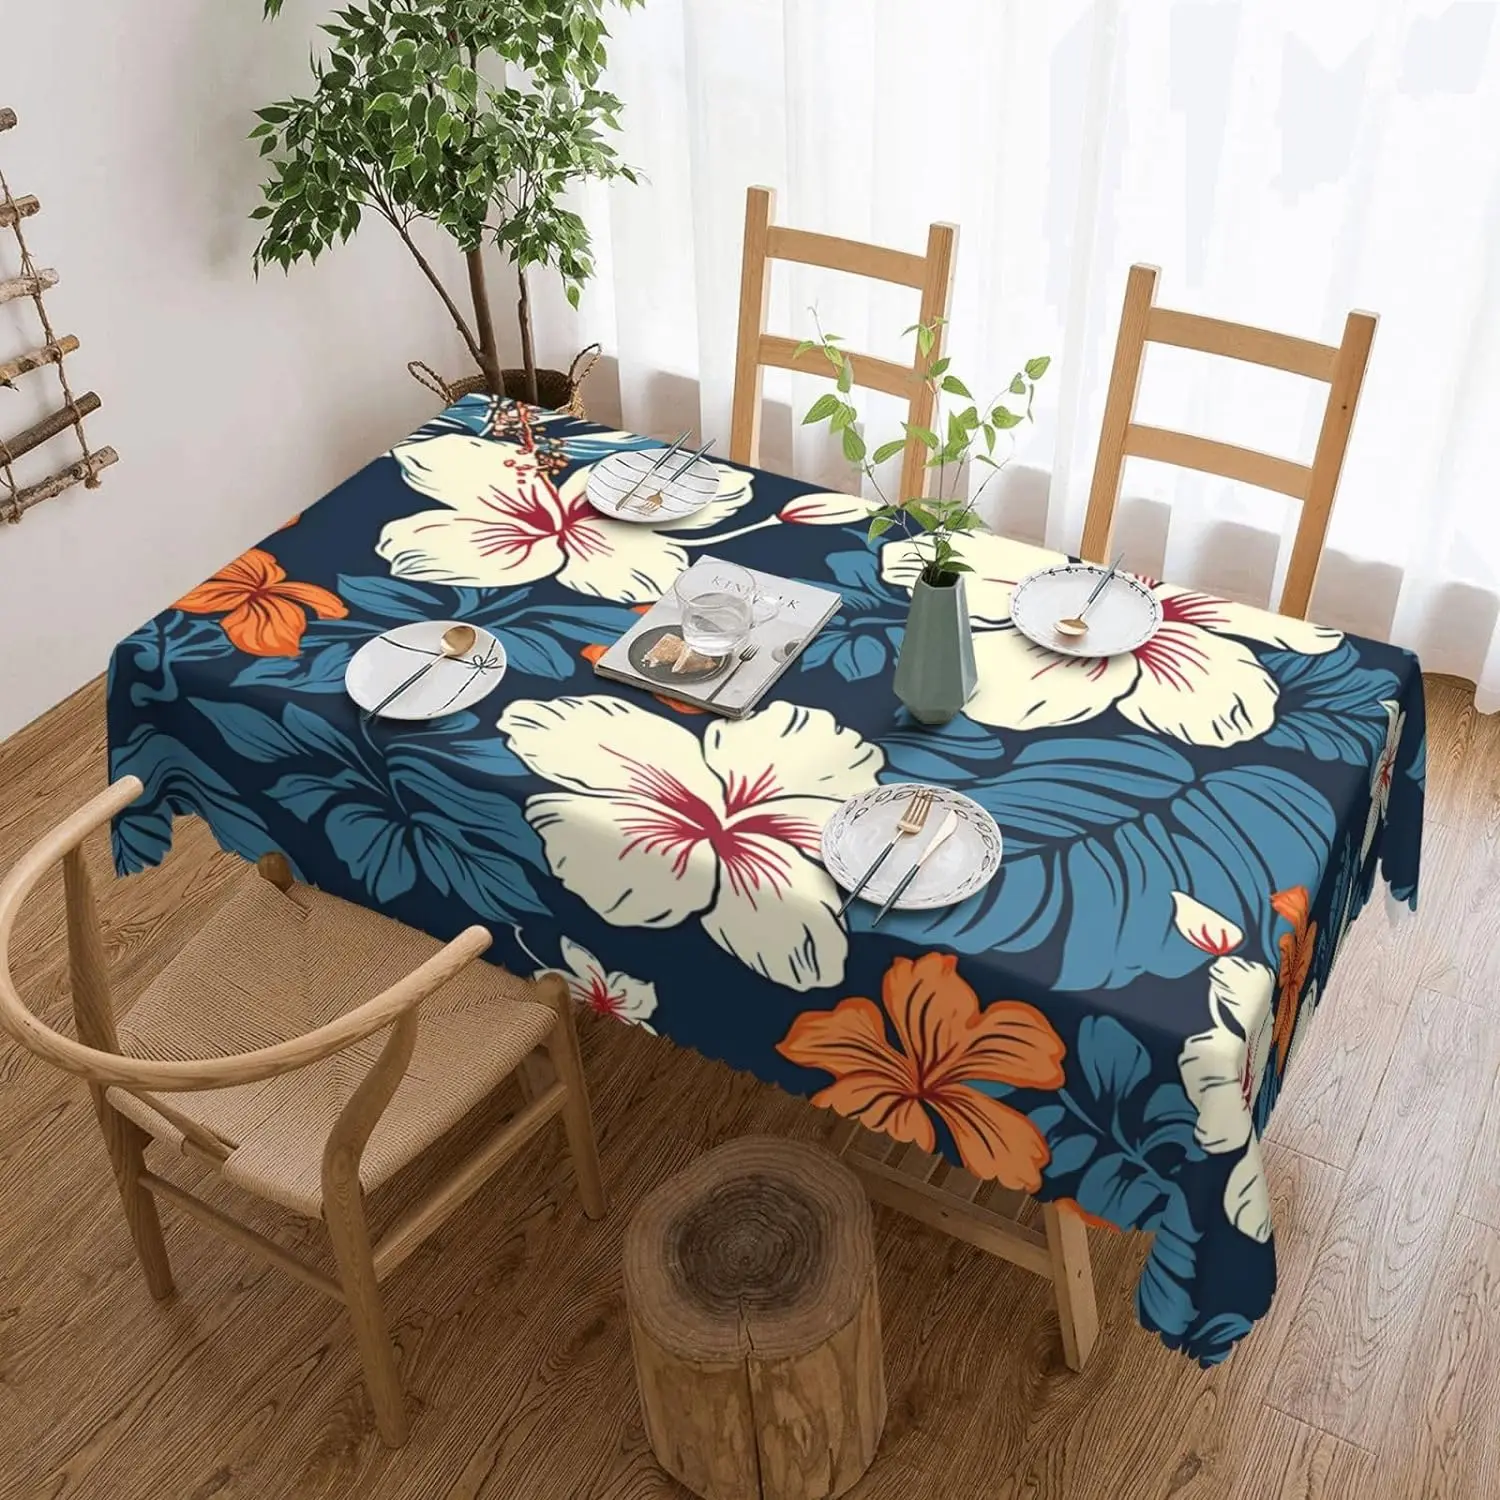 

Hawaii Flower Print Tablecloth Table Decor Spring Summer Theme Waterproof Table Covers for Kitchen Picnic Dining Wedding Decor